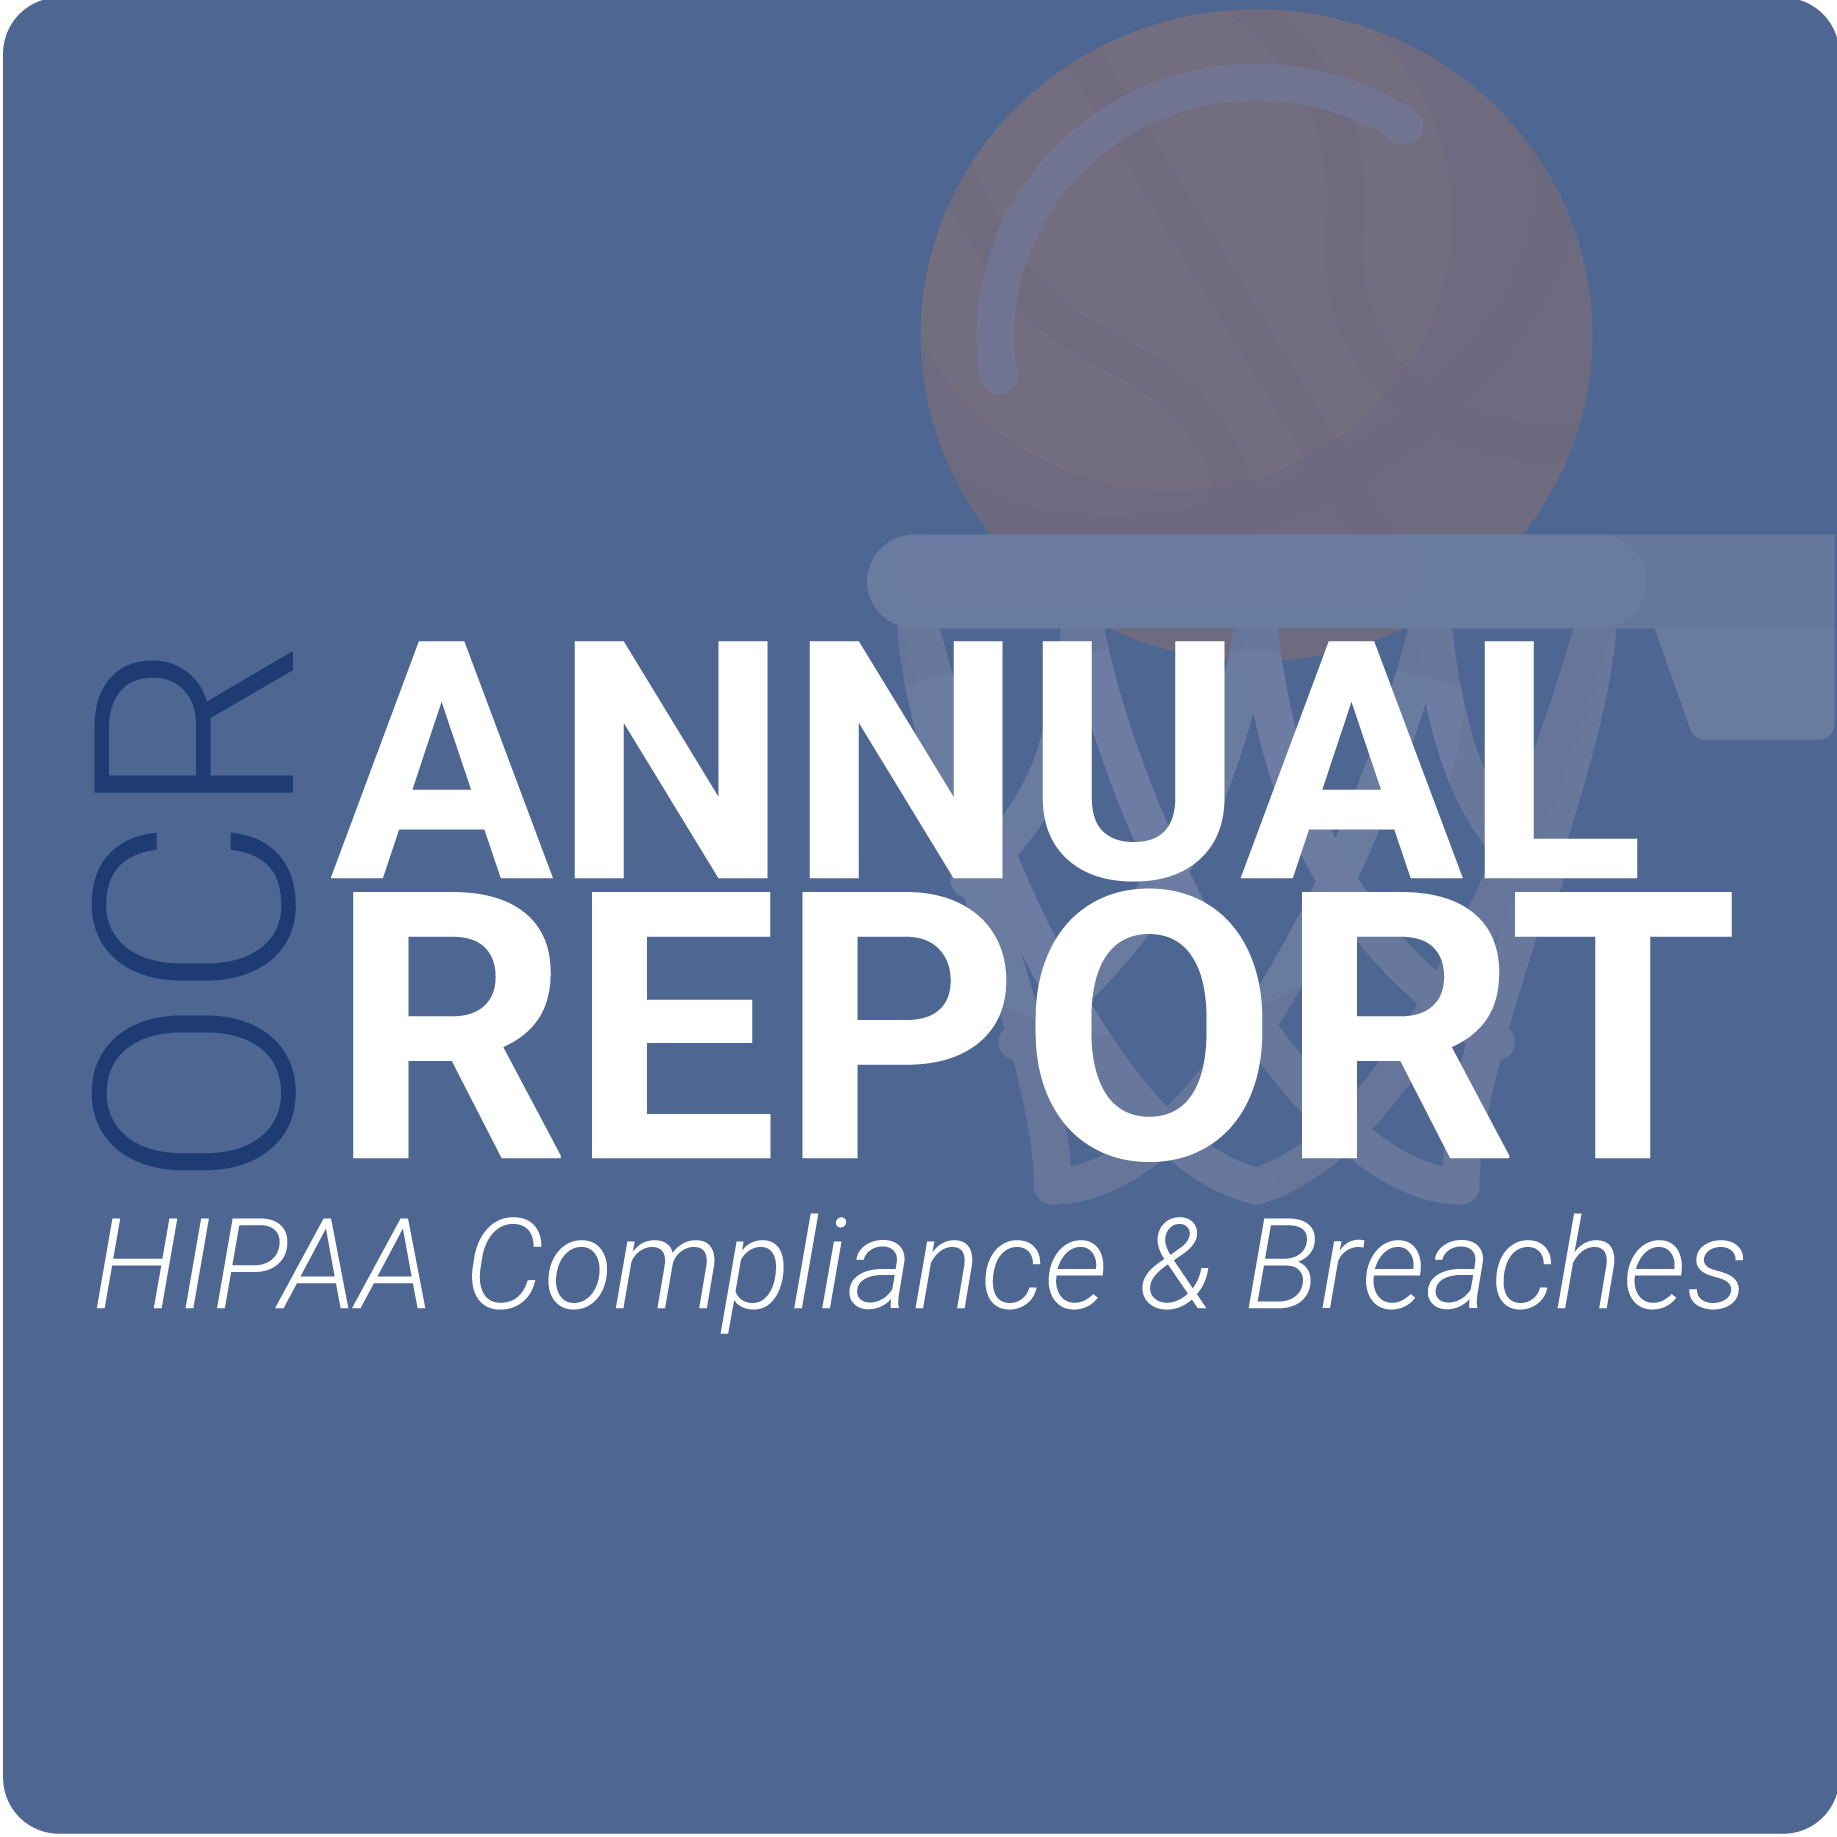 OCR Releases Annual HIPAA Compliance Reports